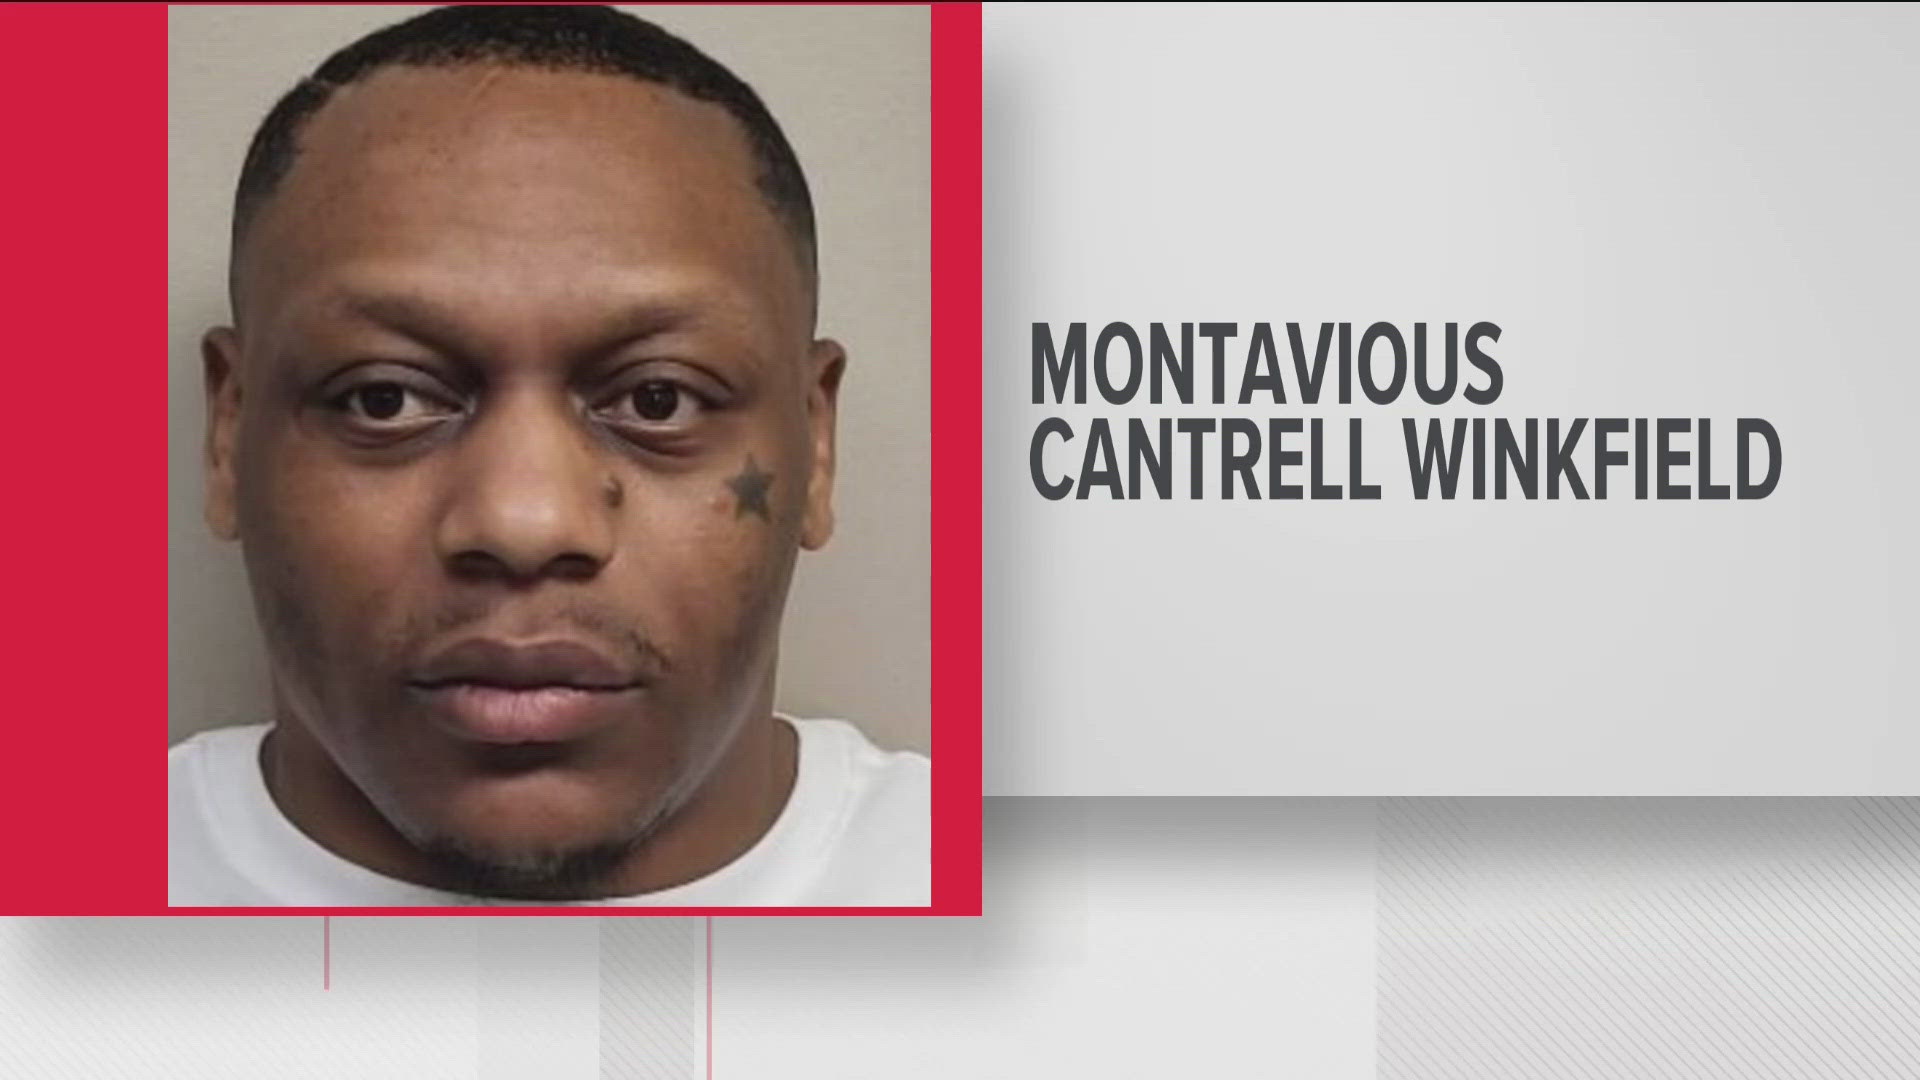 The GBI is searching for Montavious Cantrell Winkfield, who they say shot at officers in Toccoa.